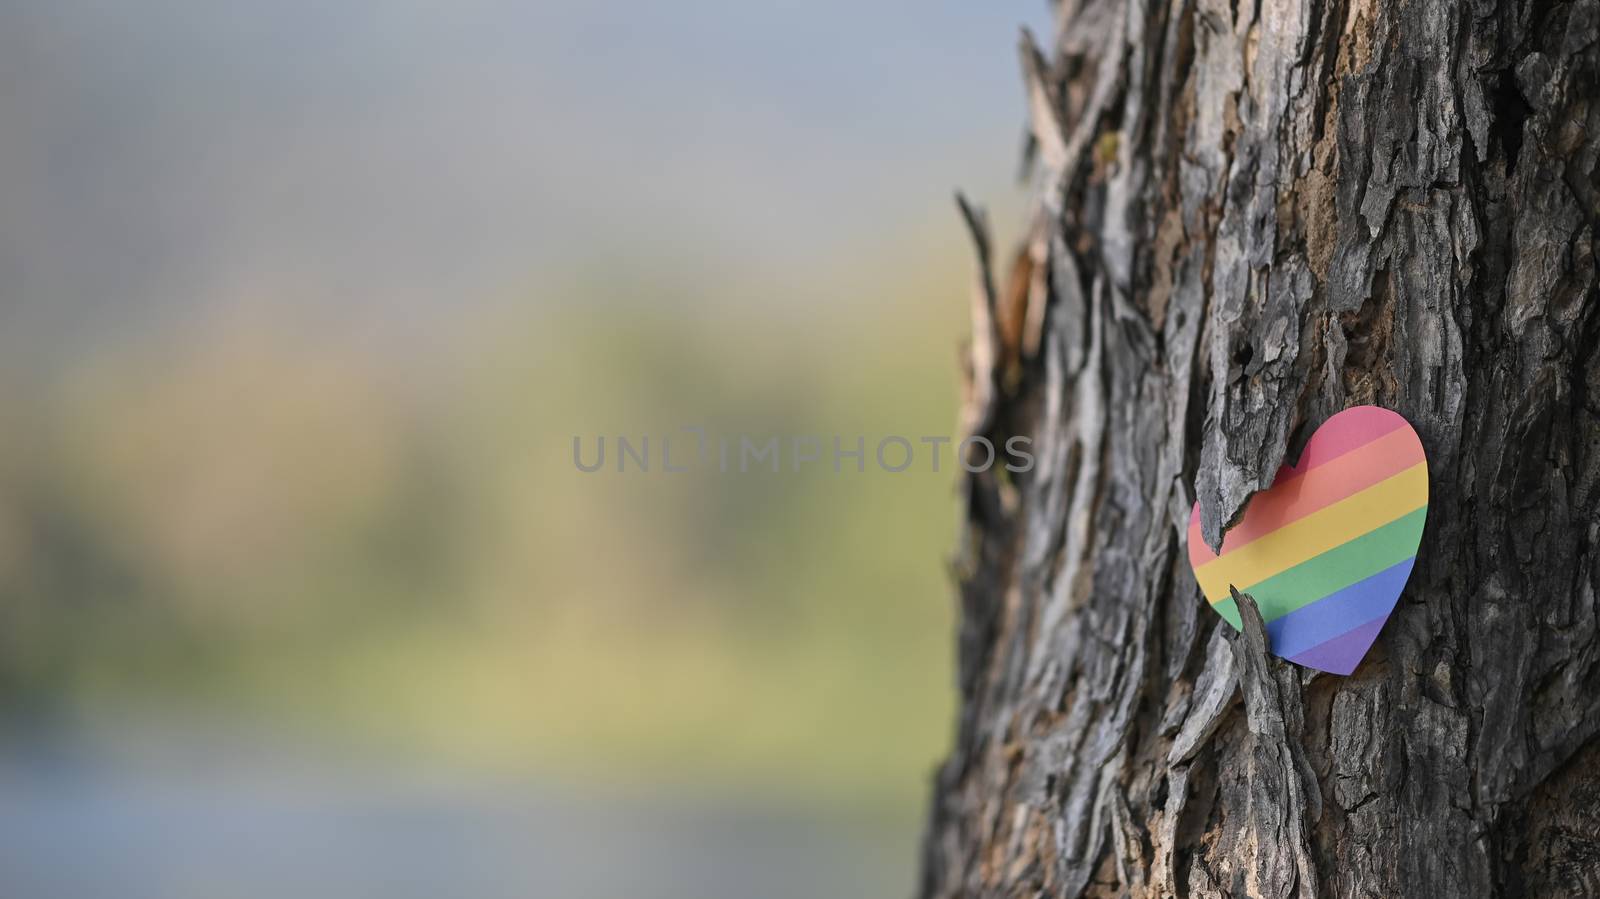 LGBT hearts symbol attached with bark of tree. LGBT happiness concept.